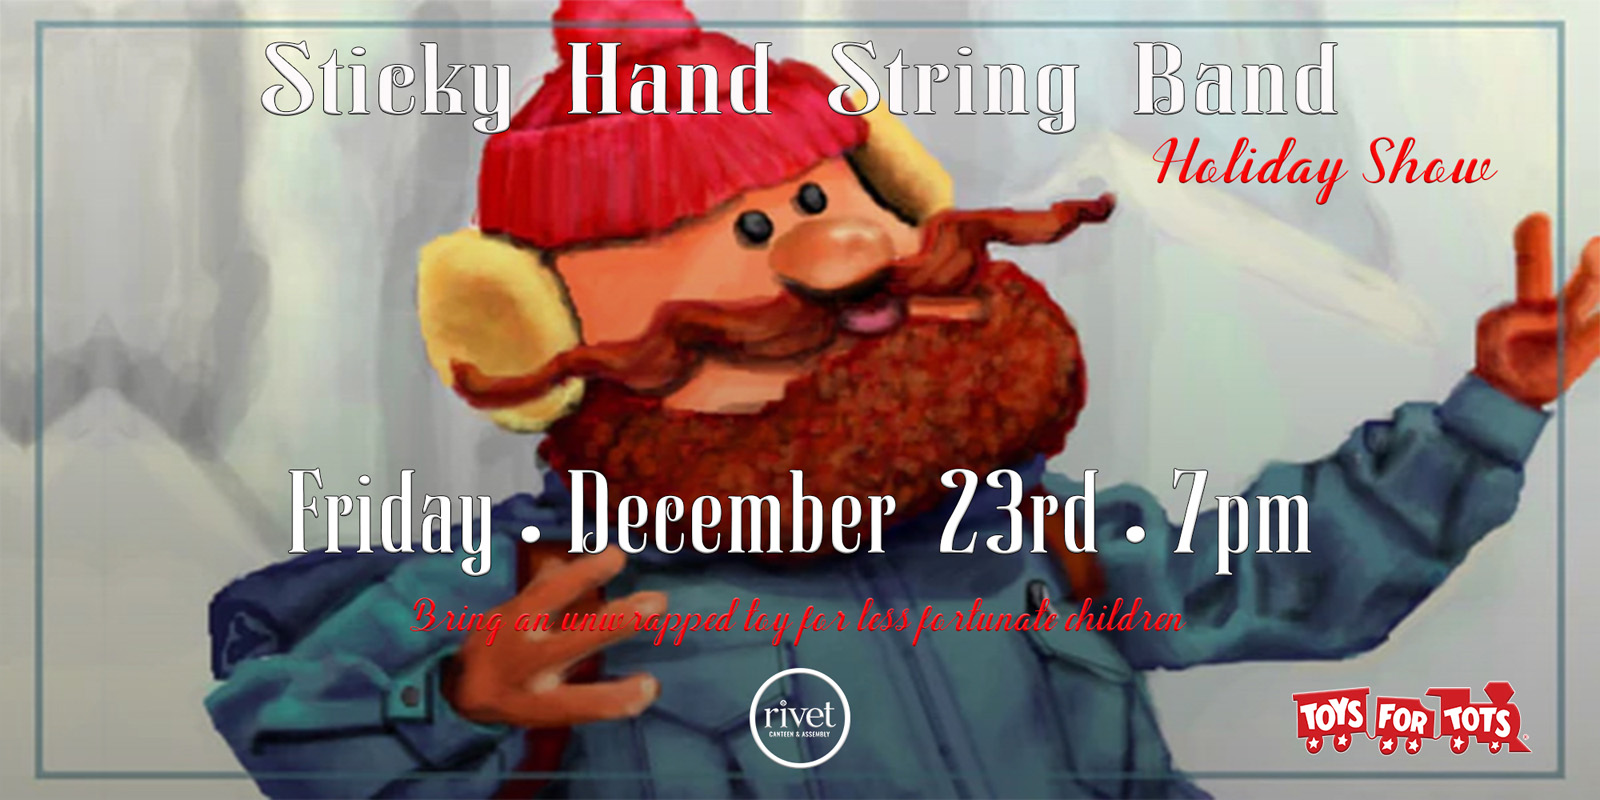 Holiday charity show with Sticky Hand String Band performing live at Rivet: Canteen & Assembly on Friday, December 23rd!